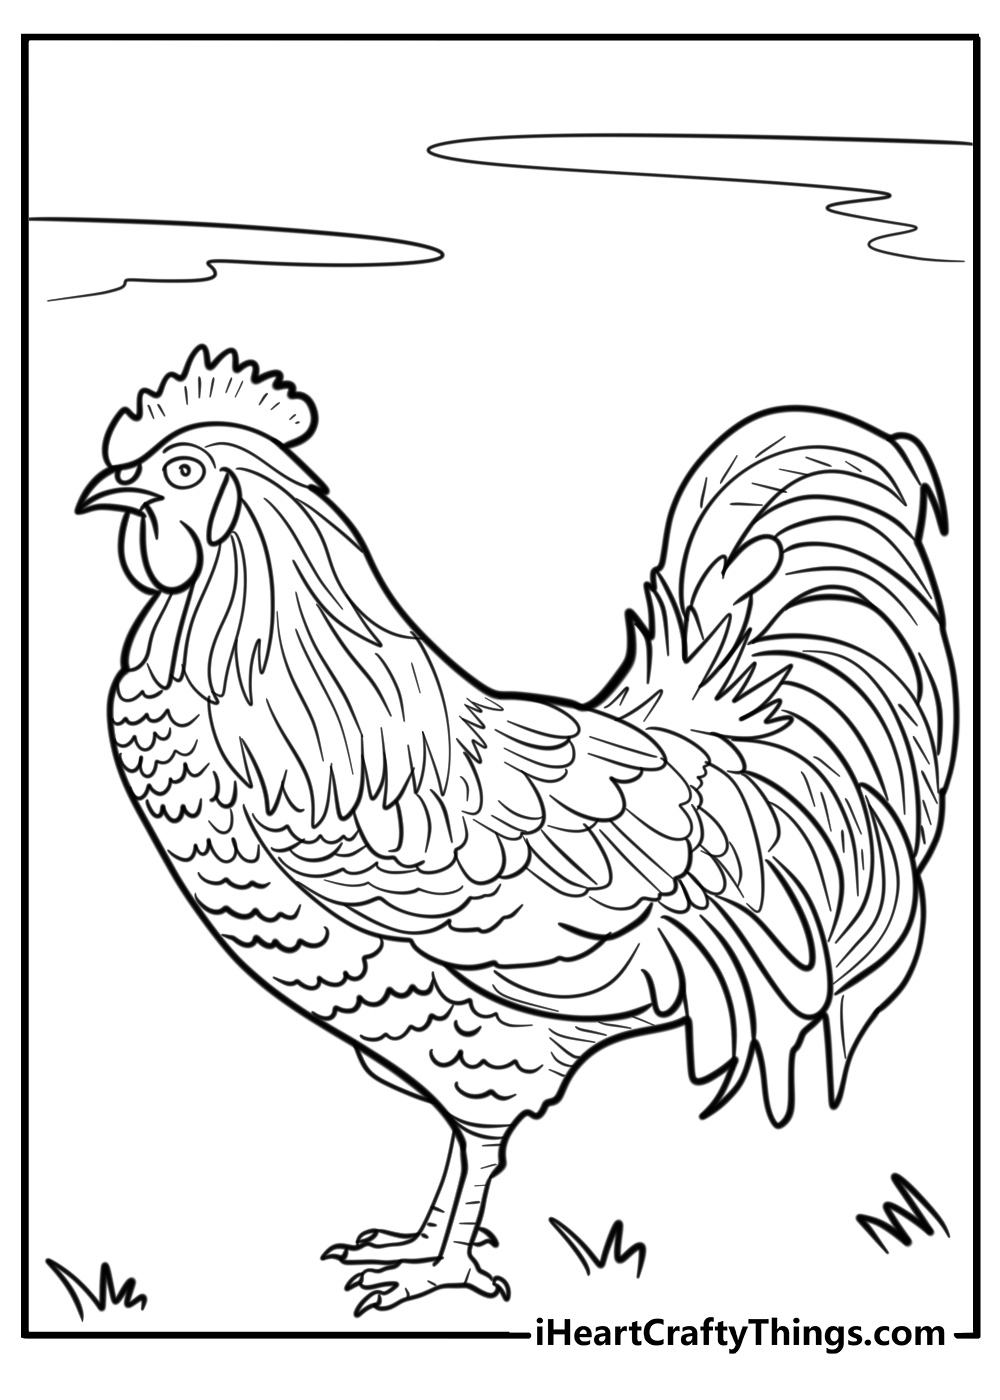 Chickens coloring pages